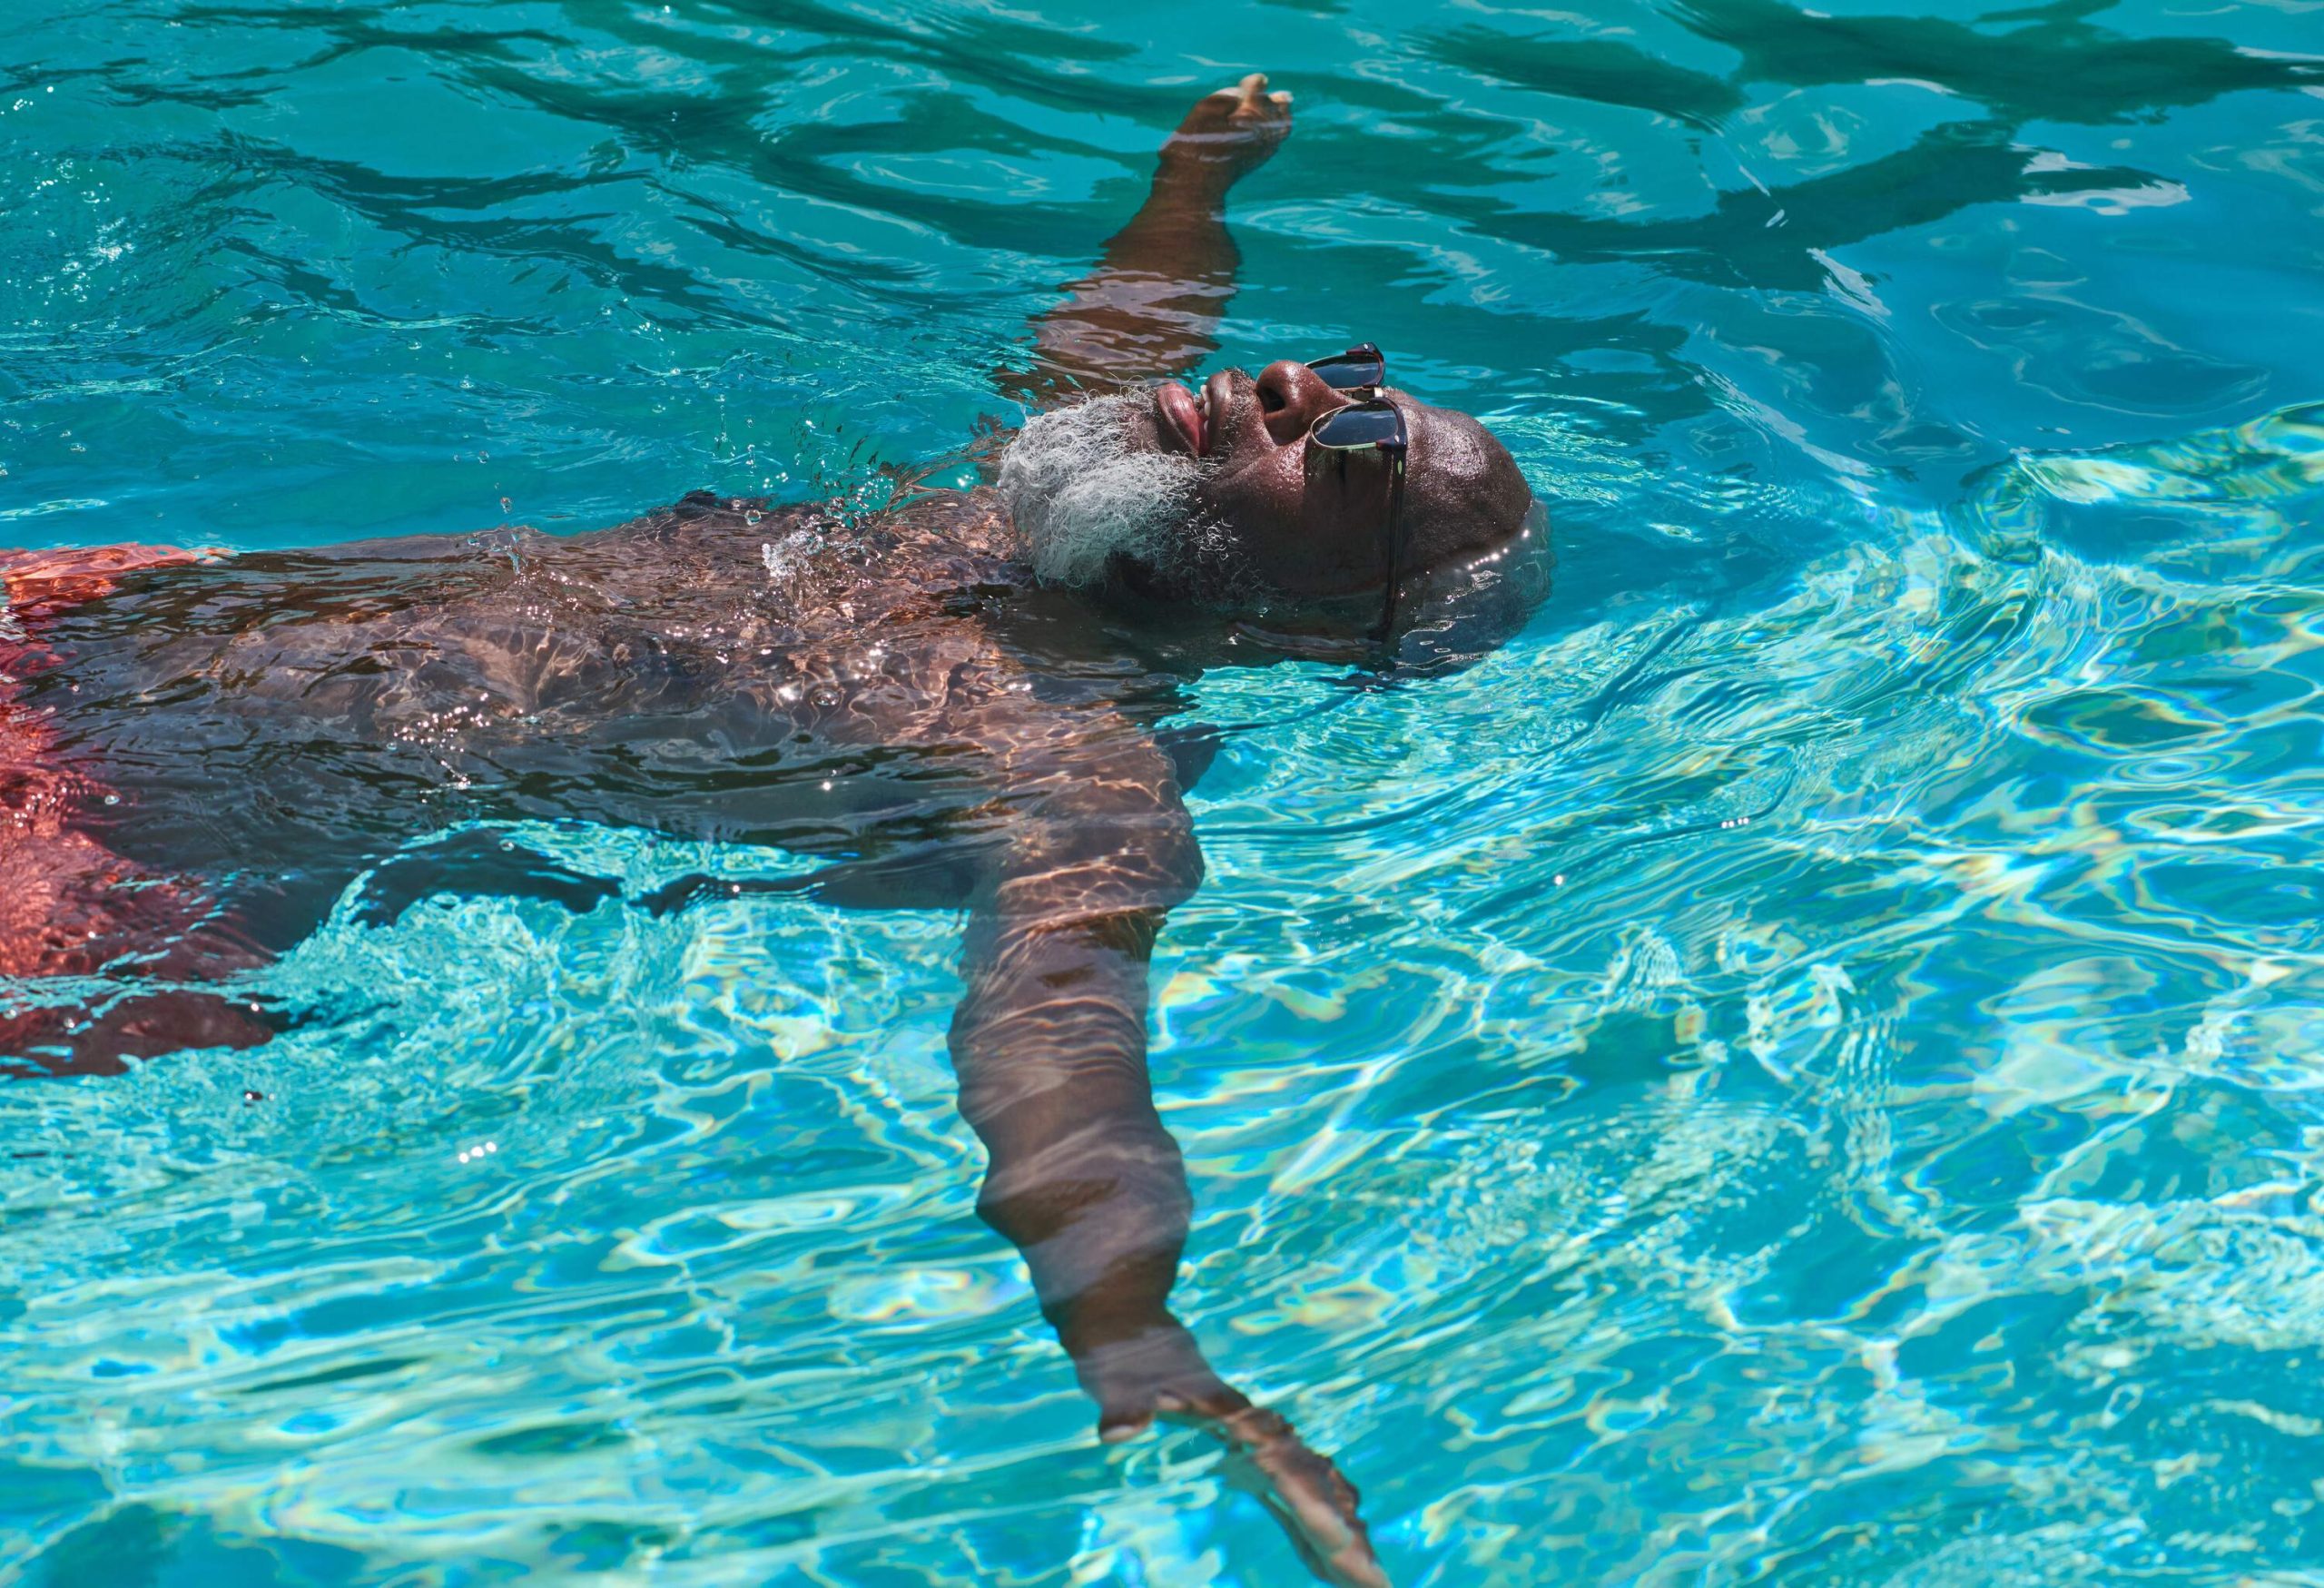 dest_spain_ibiza_hotel_pool_man_relaxes_gettyimages-1192125536